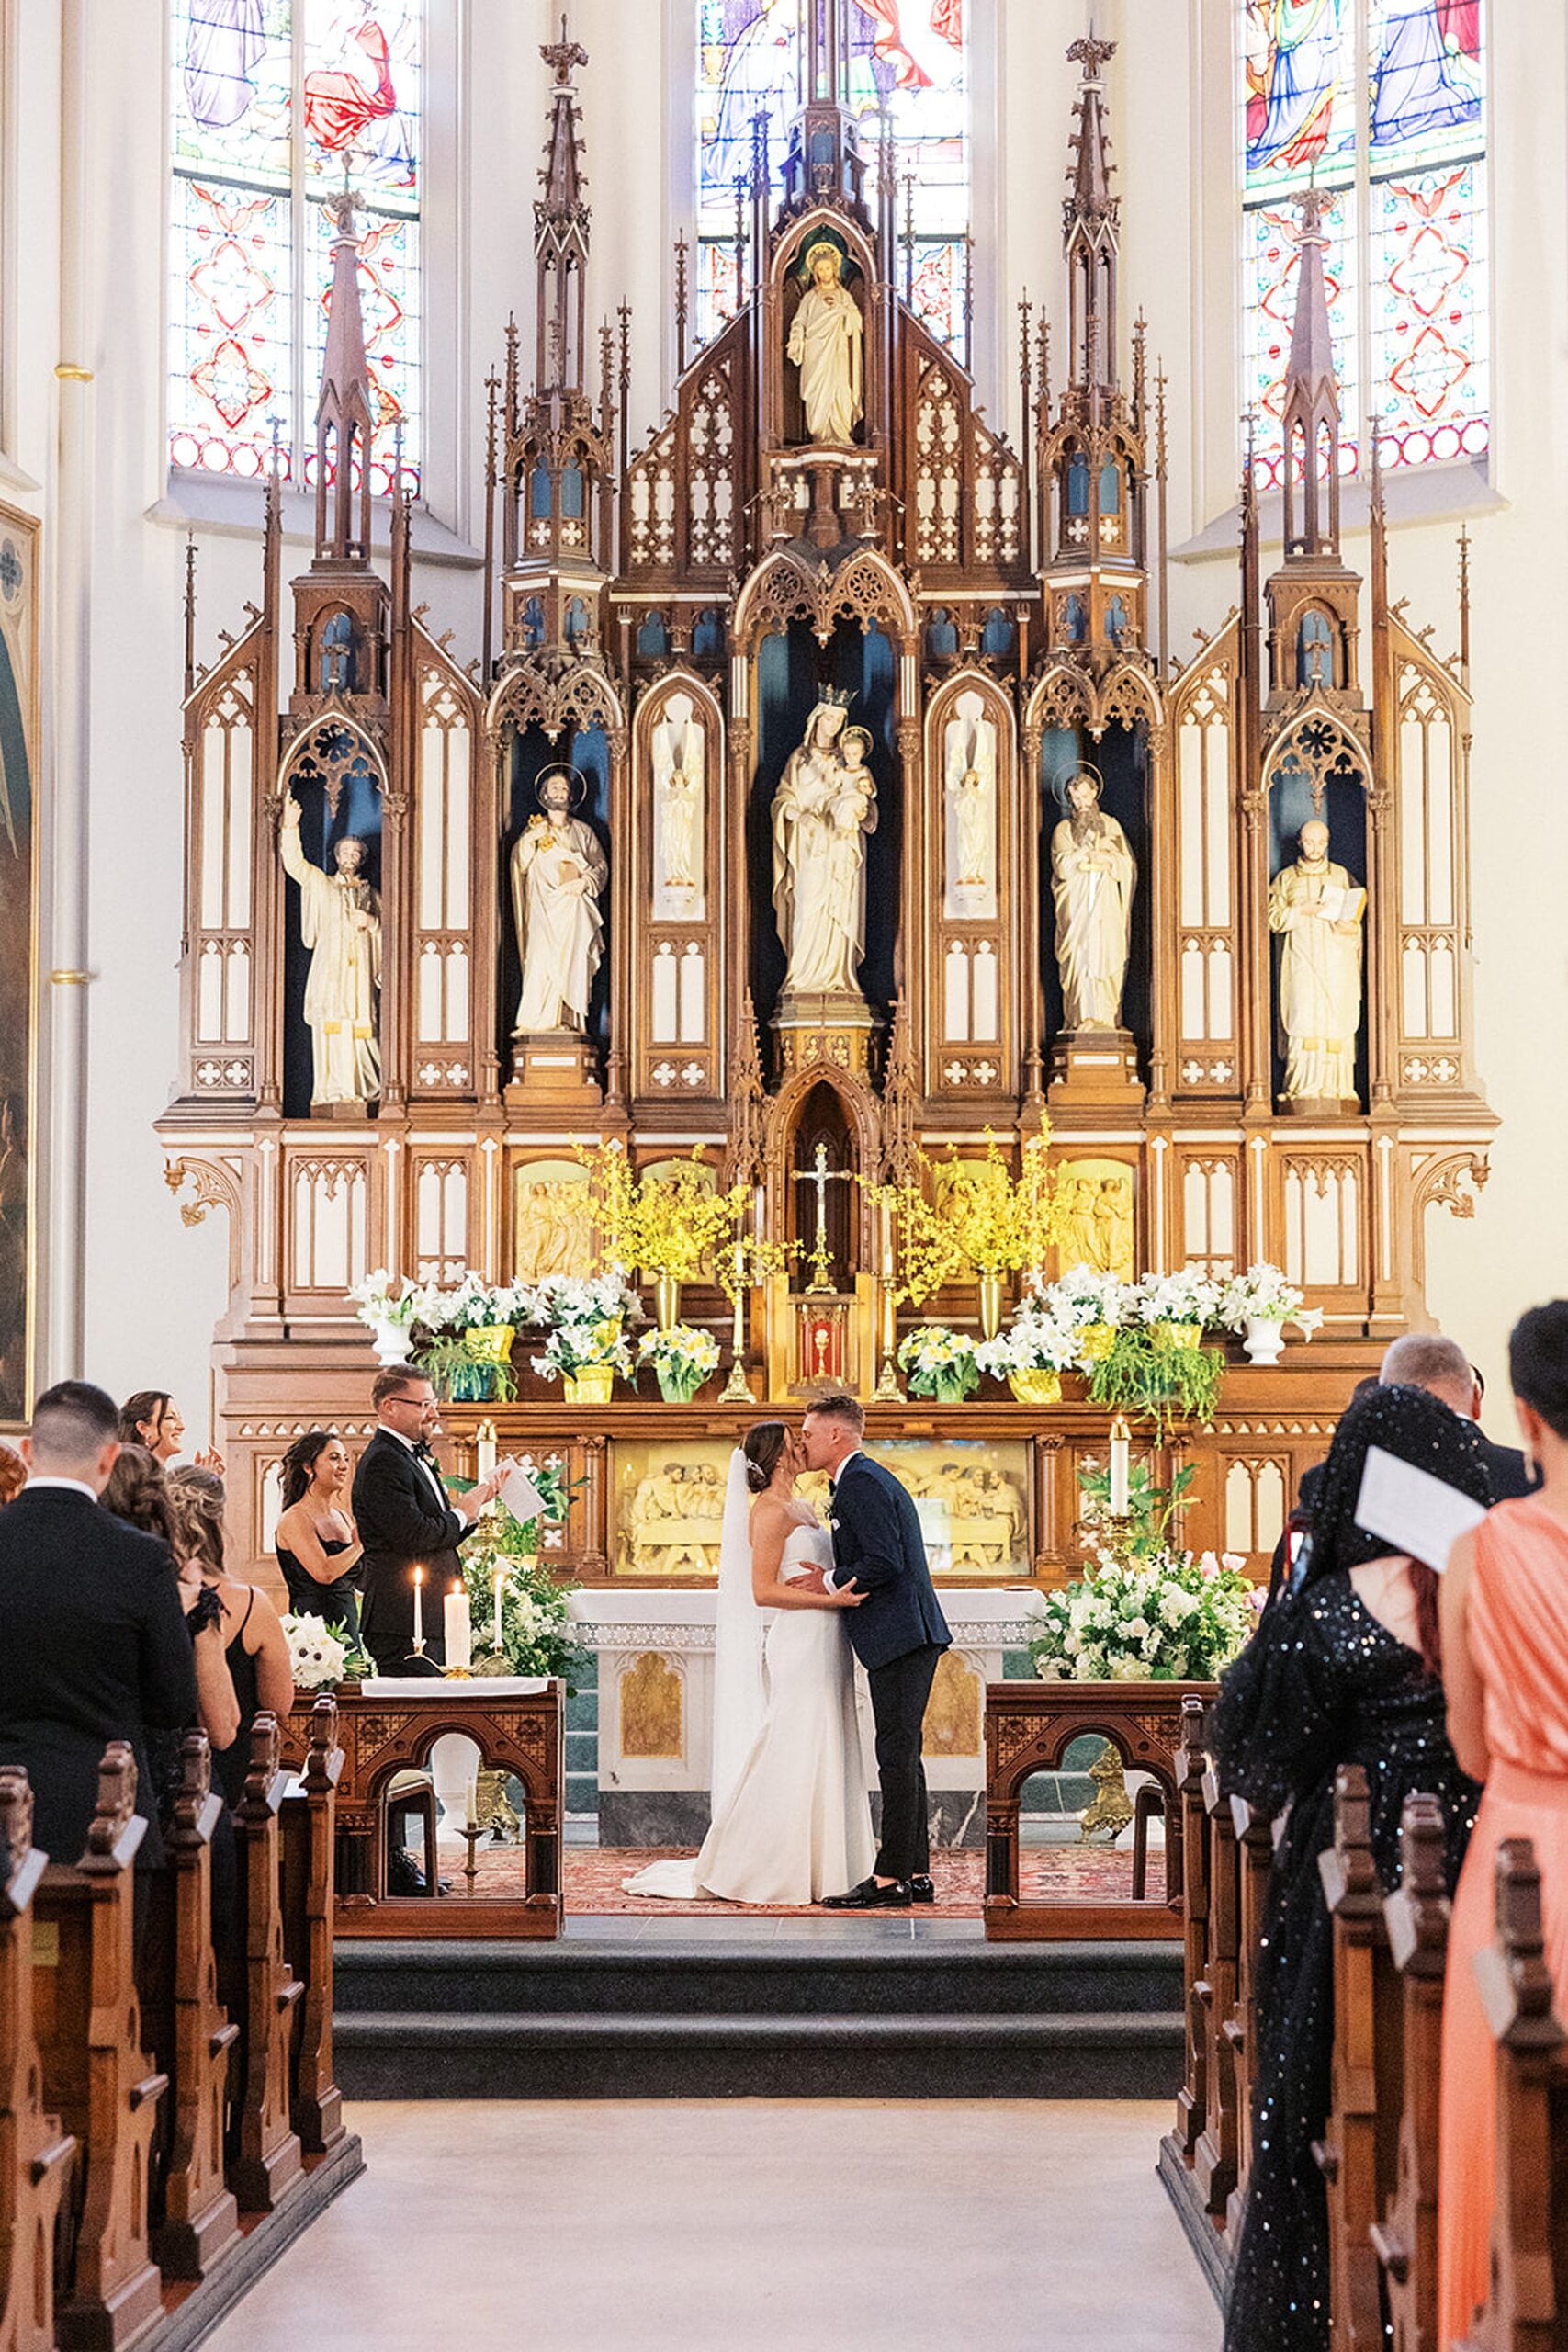 Newlyweds kiss at the altar of an ornate church